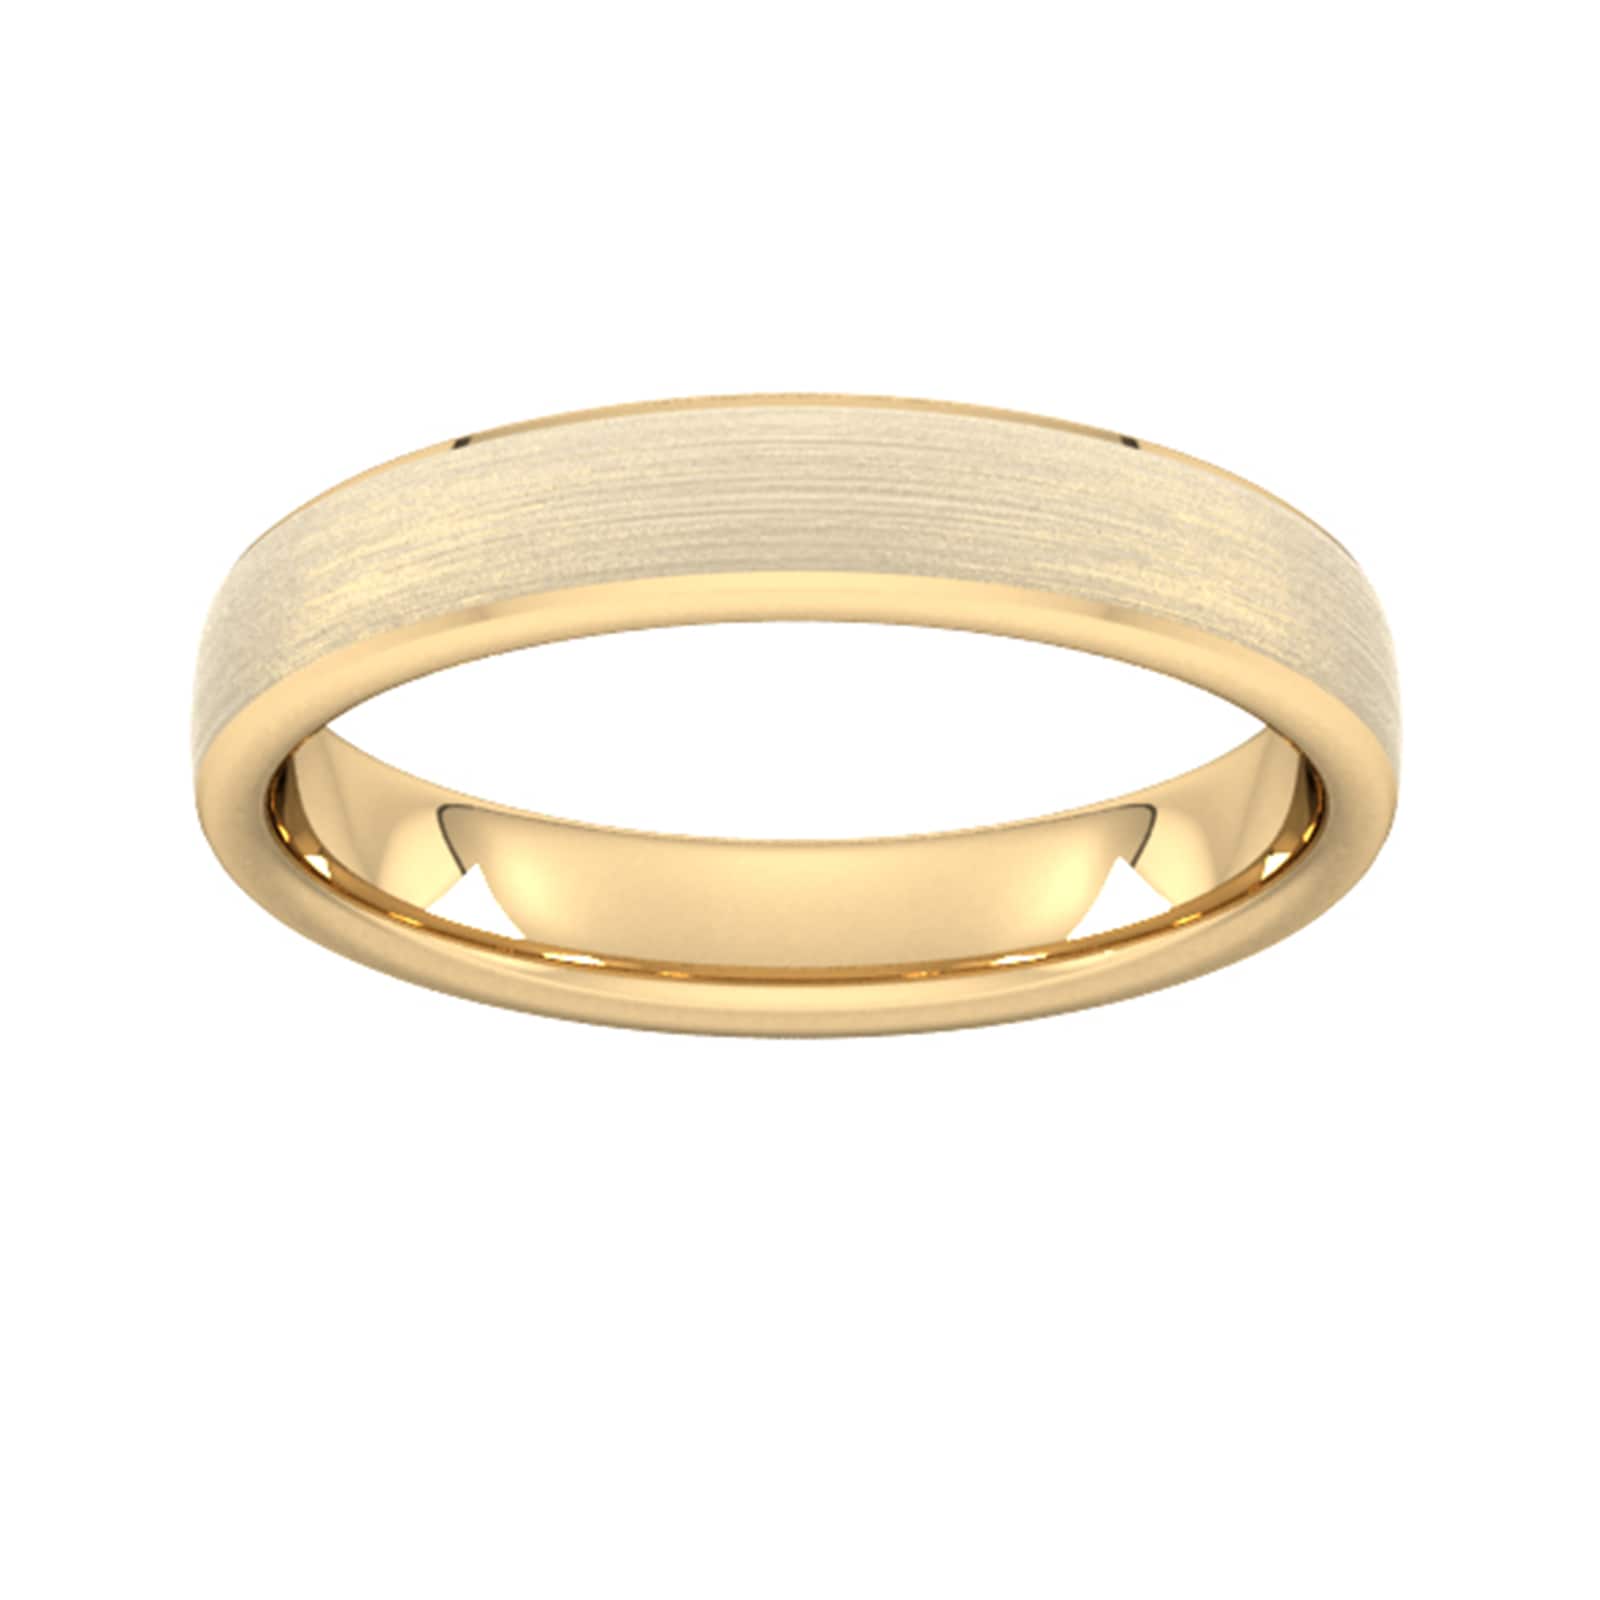 4mm Slight Court Extra Heavy Polished Chamfered Edges With Matt Centre Wedding Ring In 18 Carat Yellow Gold - Ring Size Y